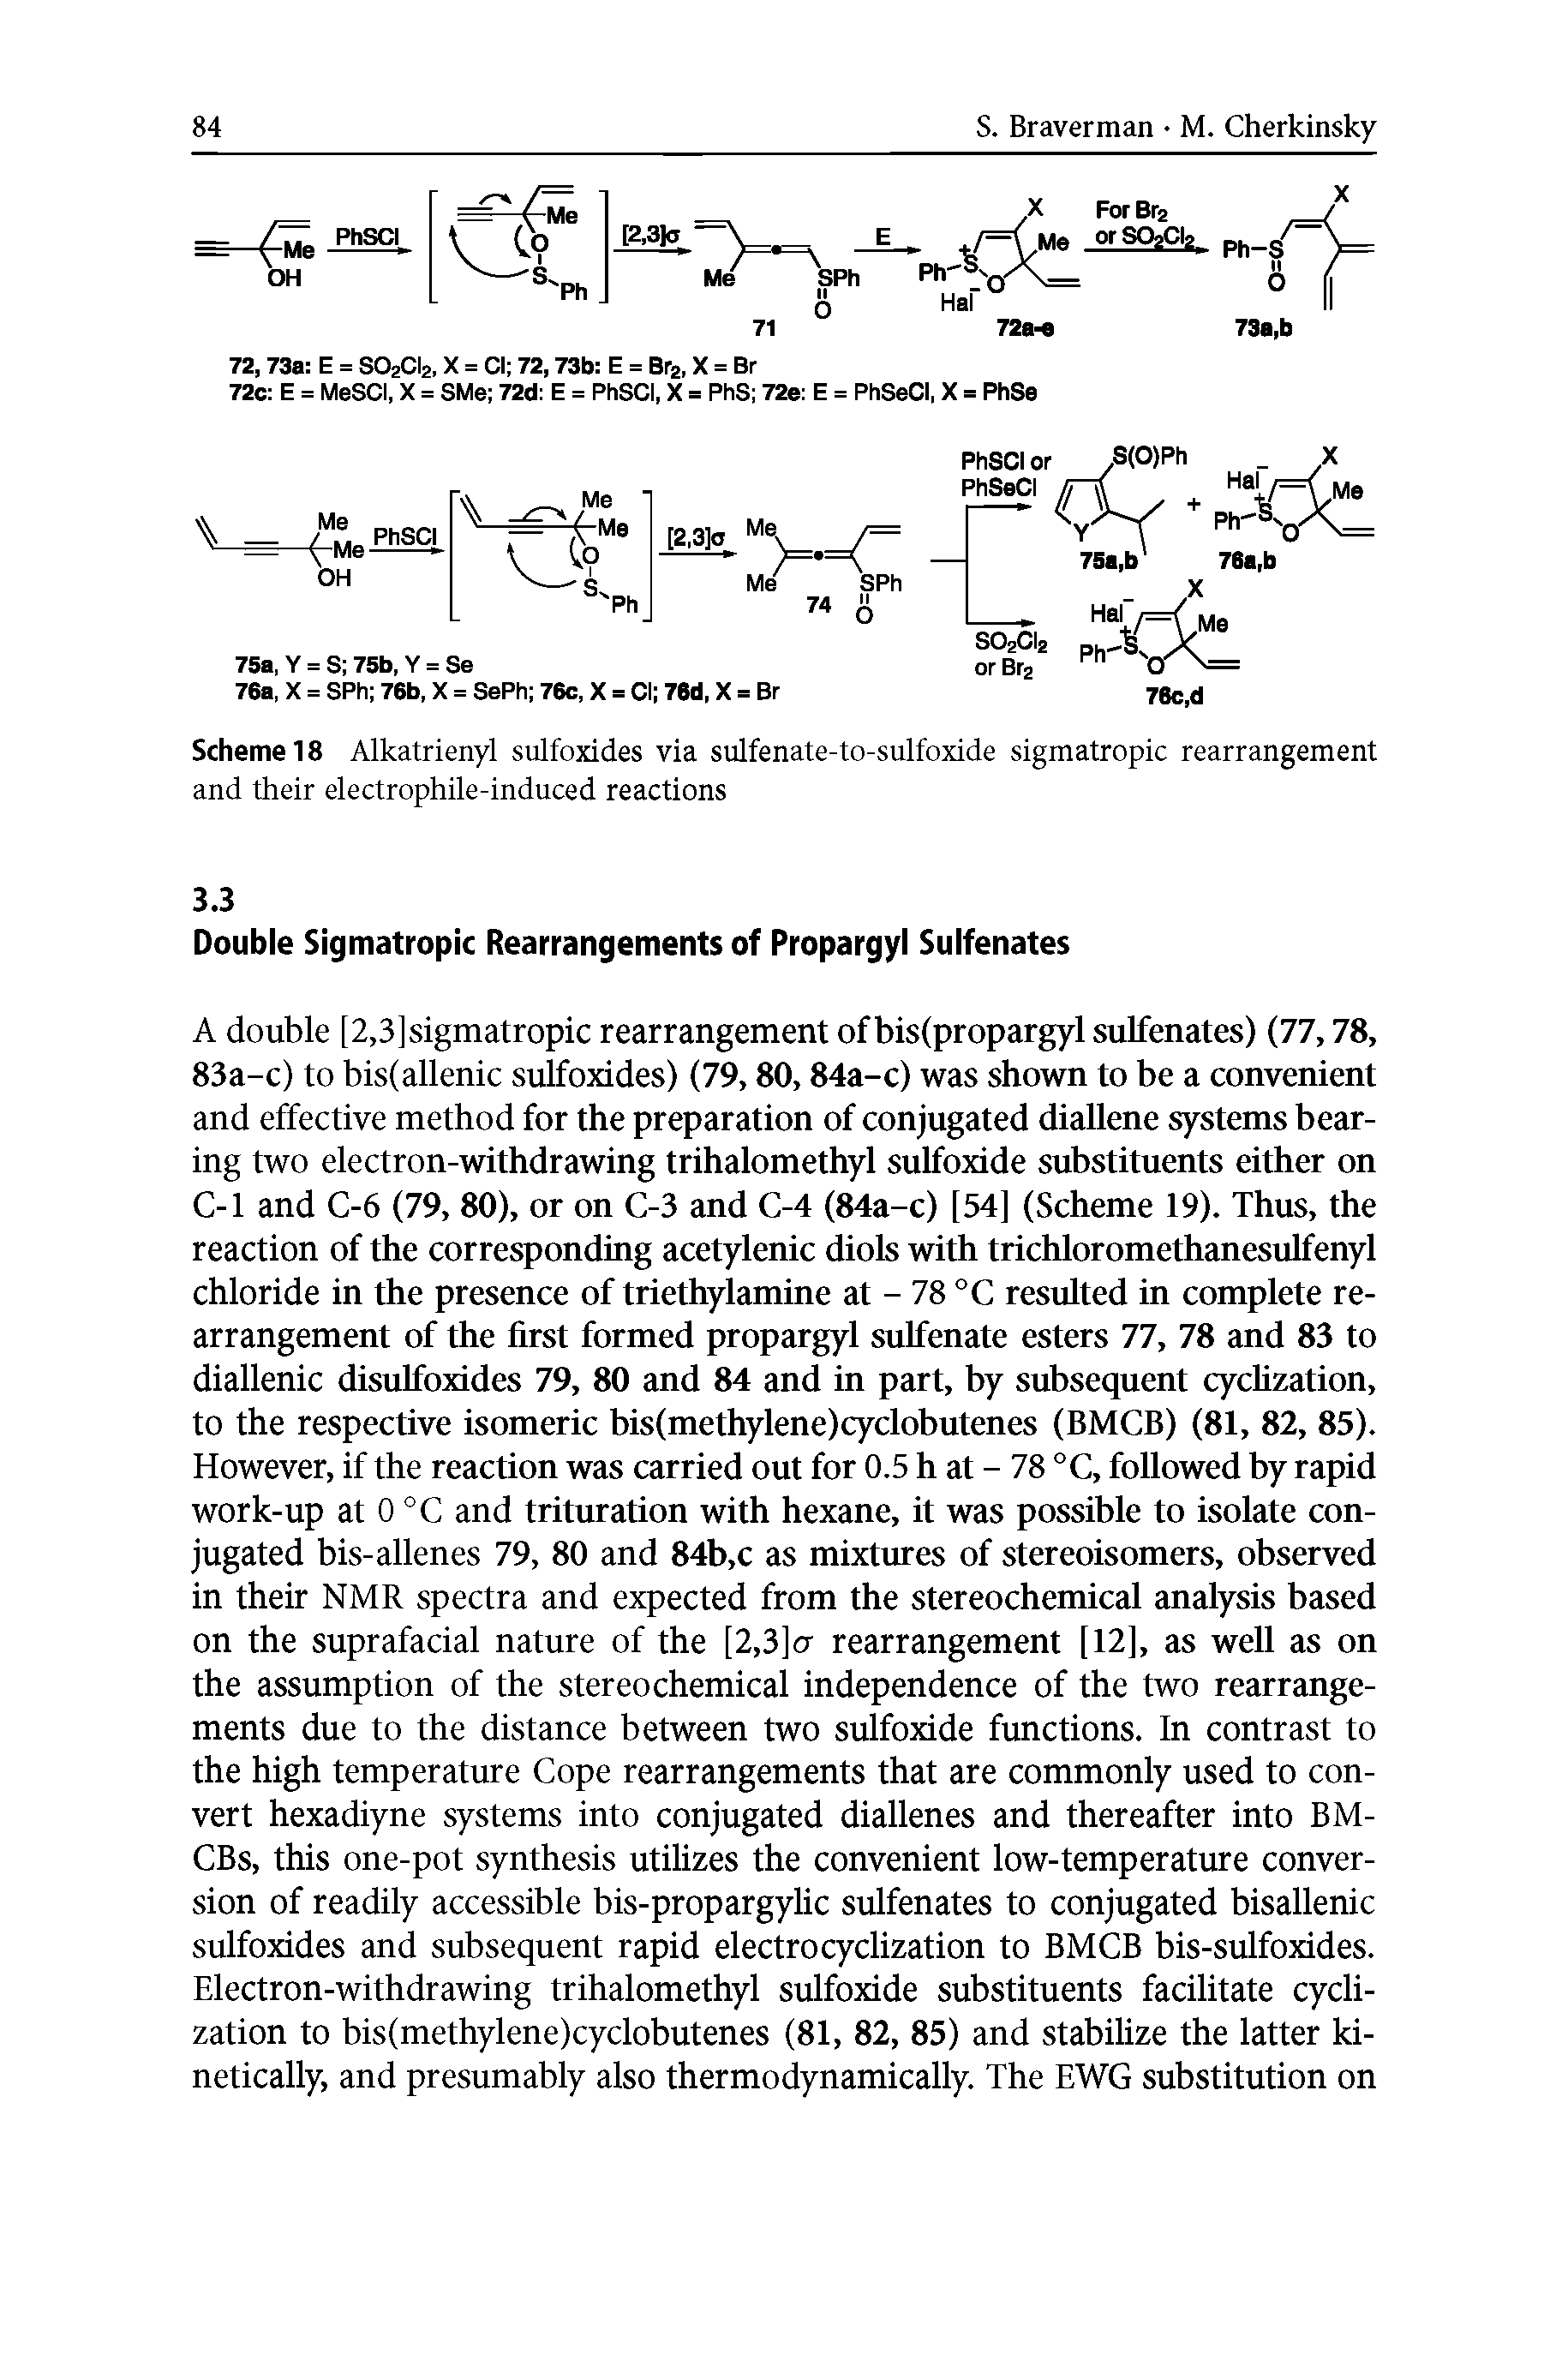 Scheme 18 Alkatrienyl sulfoxides via sulfenate-to-sulfoxide sigmatropic rearrangement and their electrophile-induced reactions...